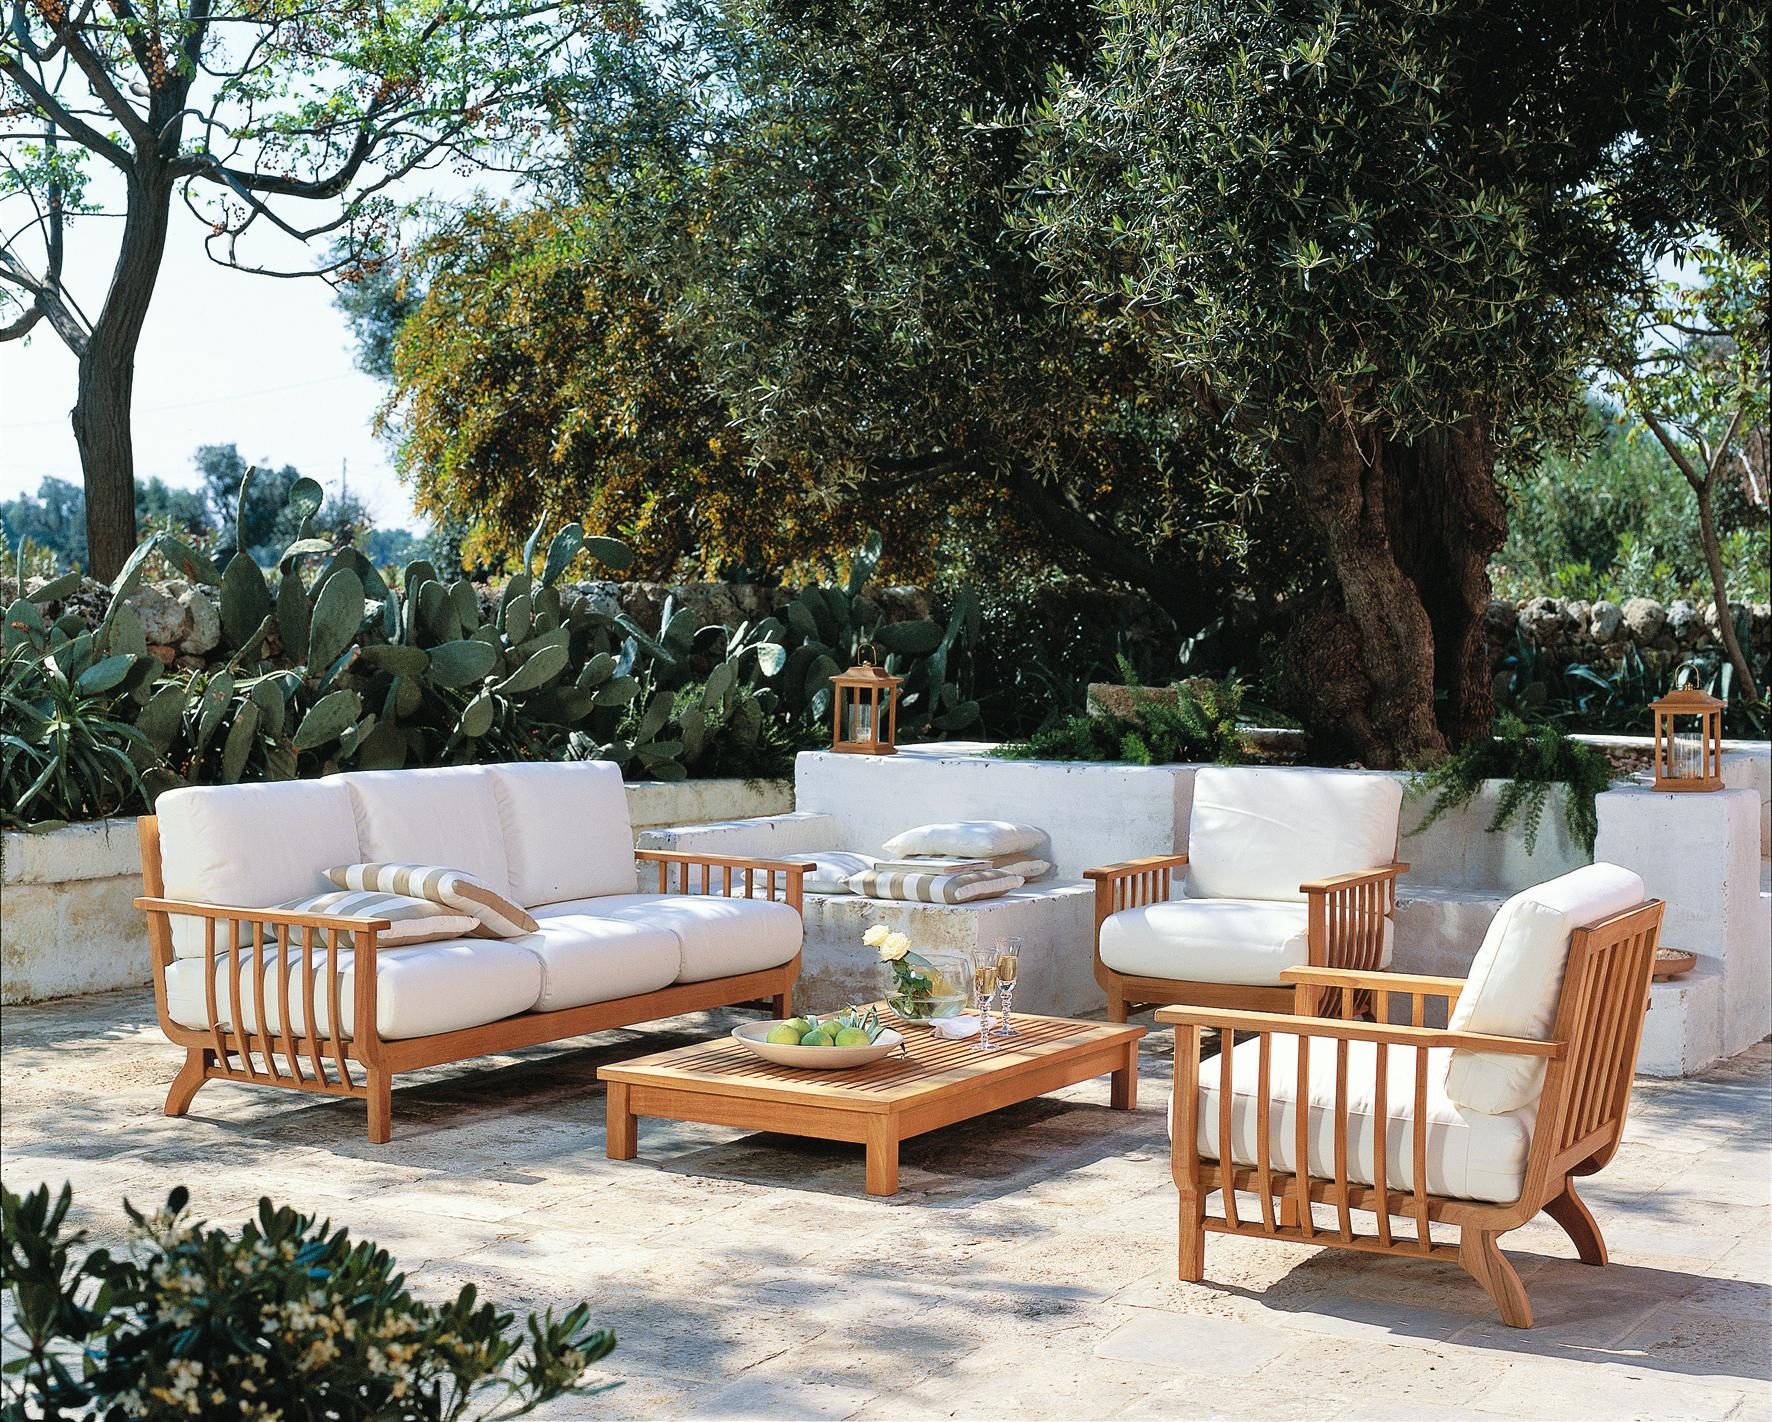 Wood Unopiu' Chelsea Sofa Outdoor Collection For Sale